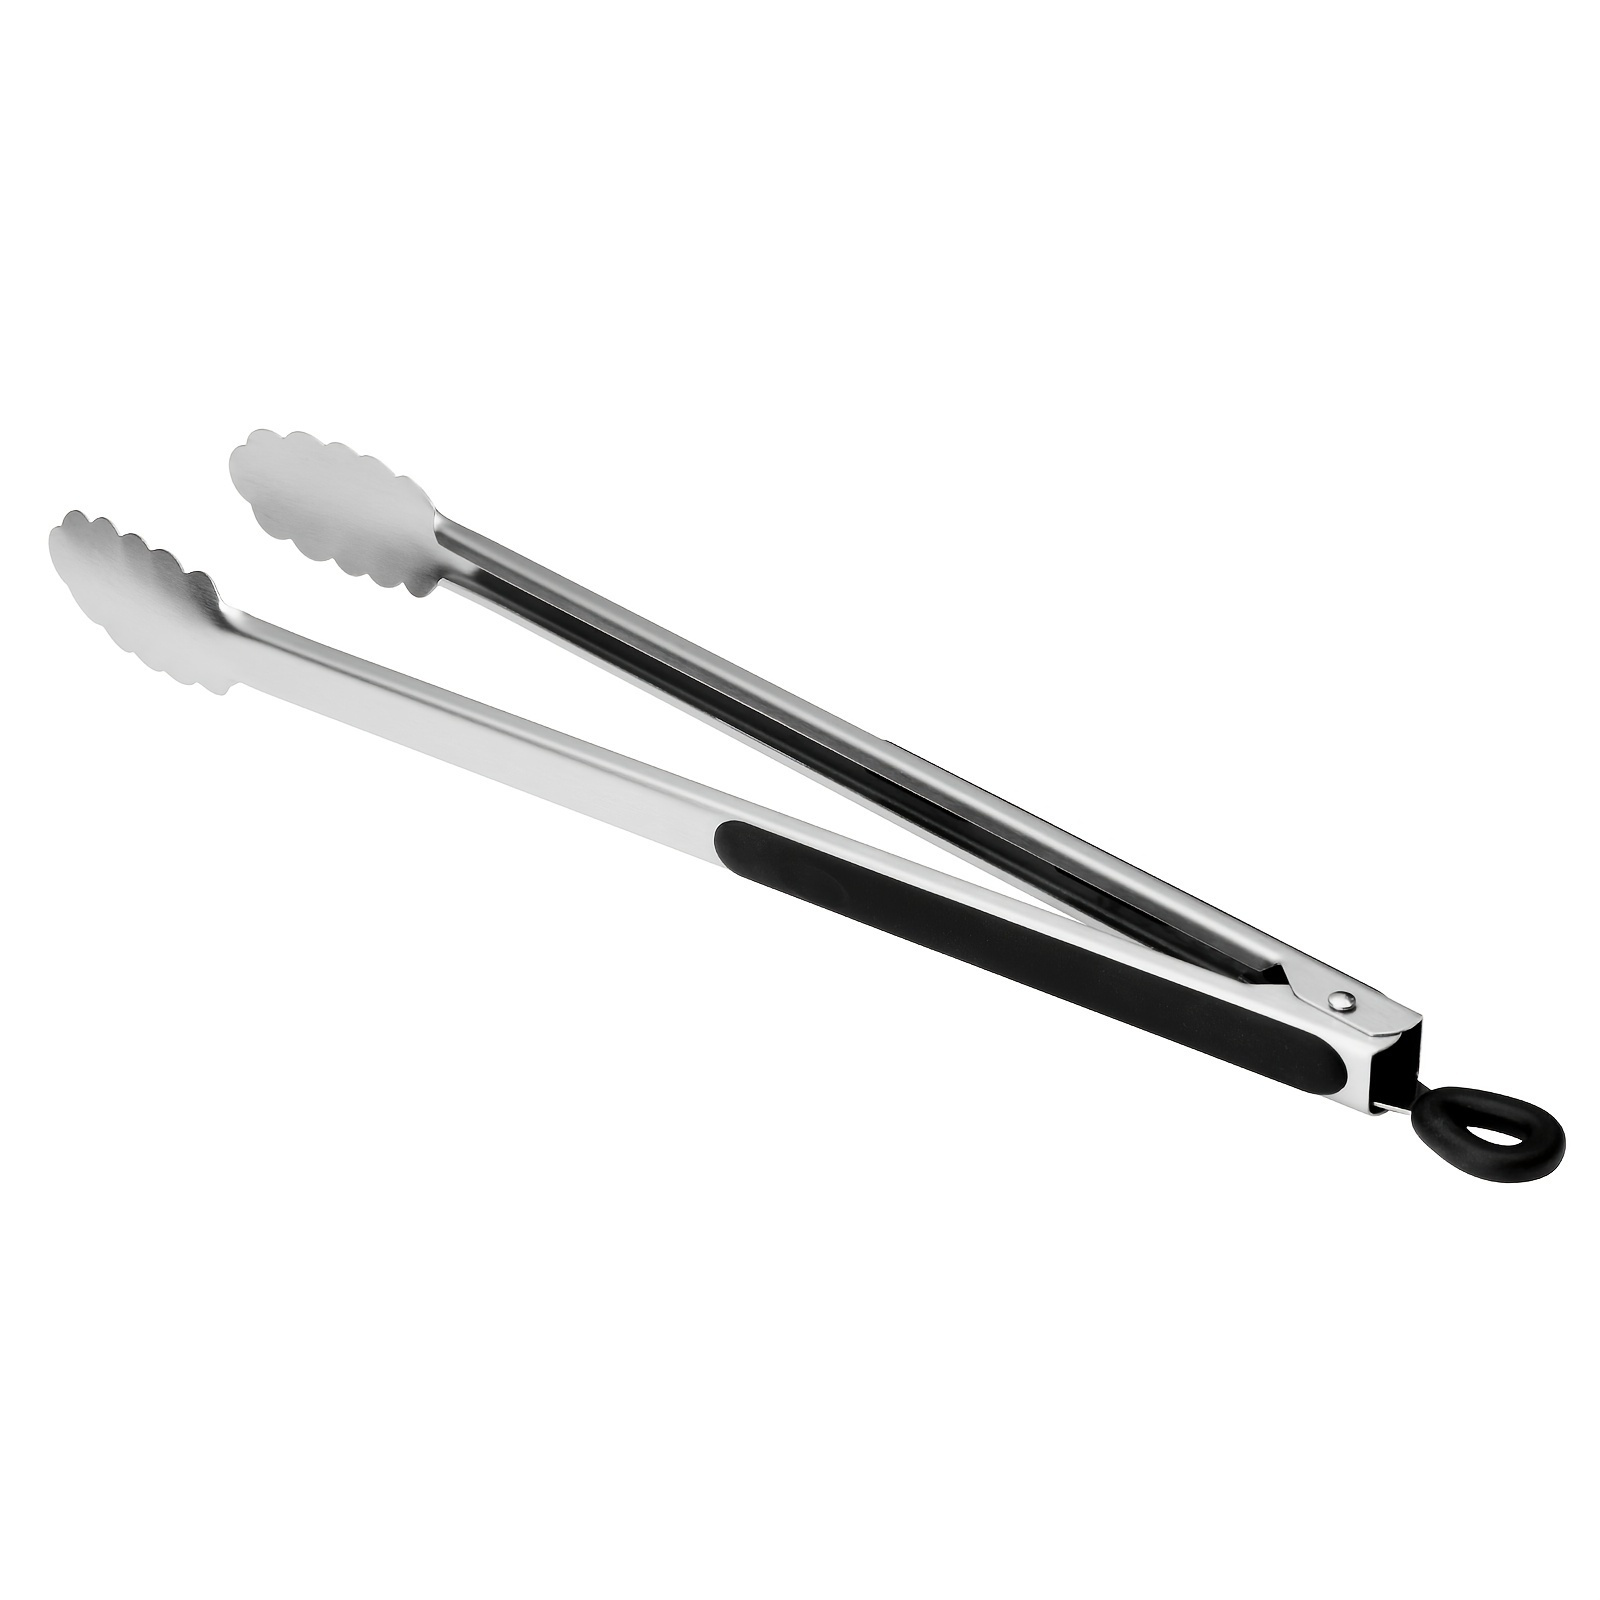 

Upgrade Your Grilling Game With This 1pc Stainless Steel Bbq Tong - Perfect For Steak, Salad & Bread!